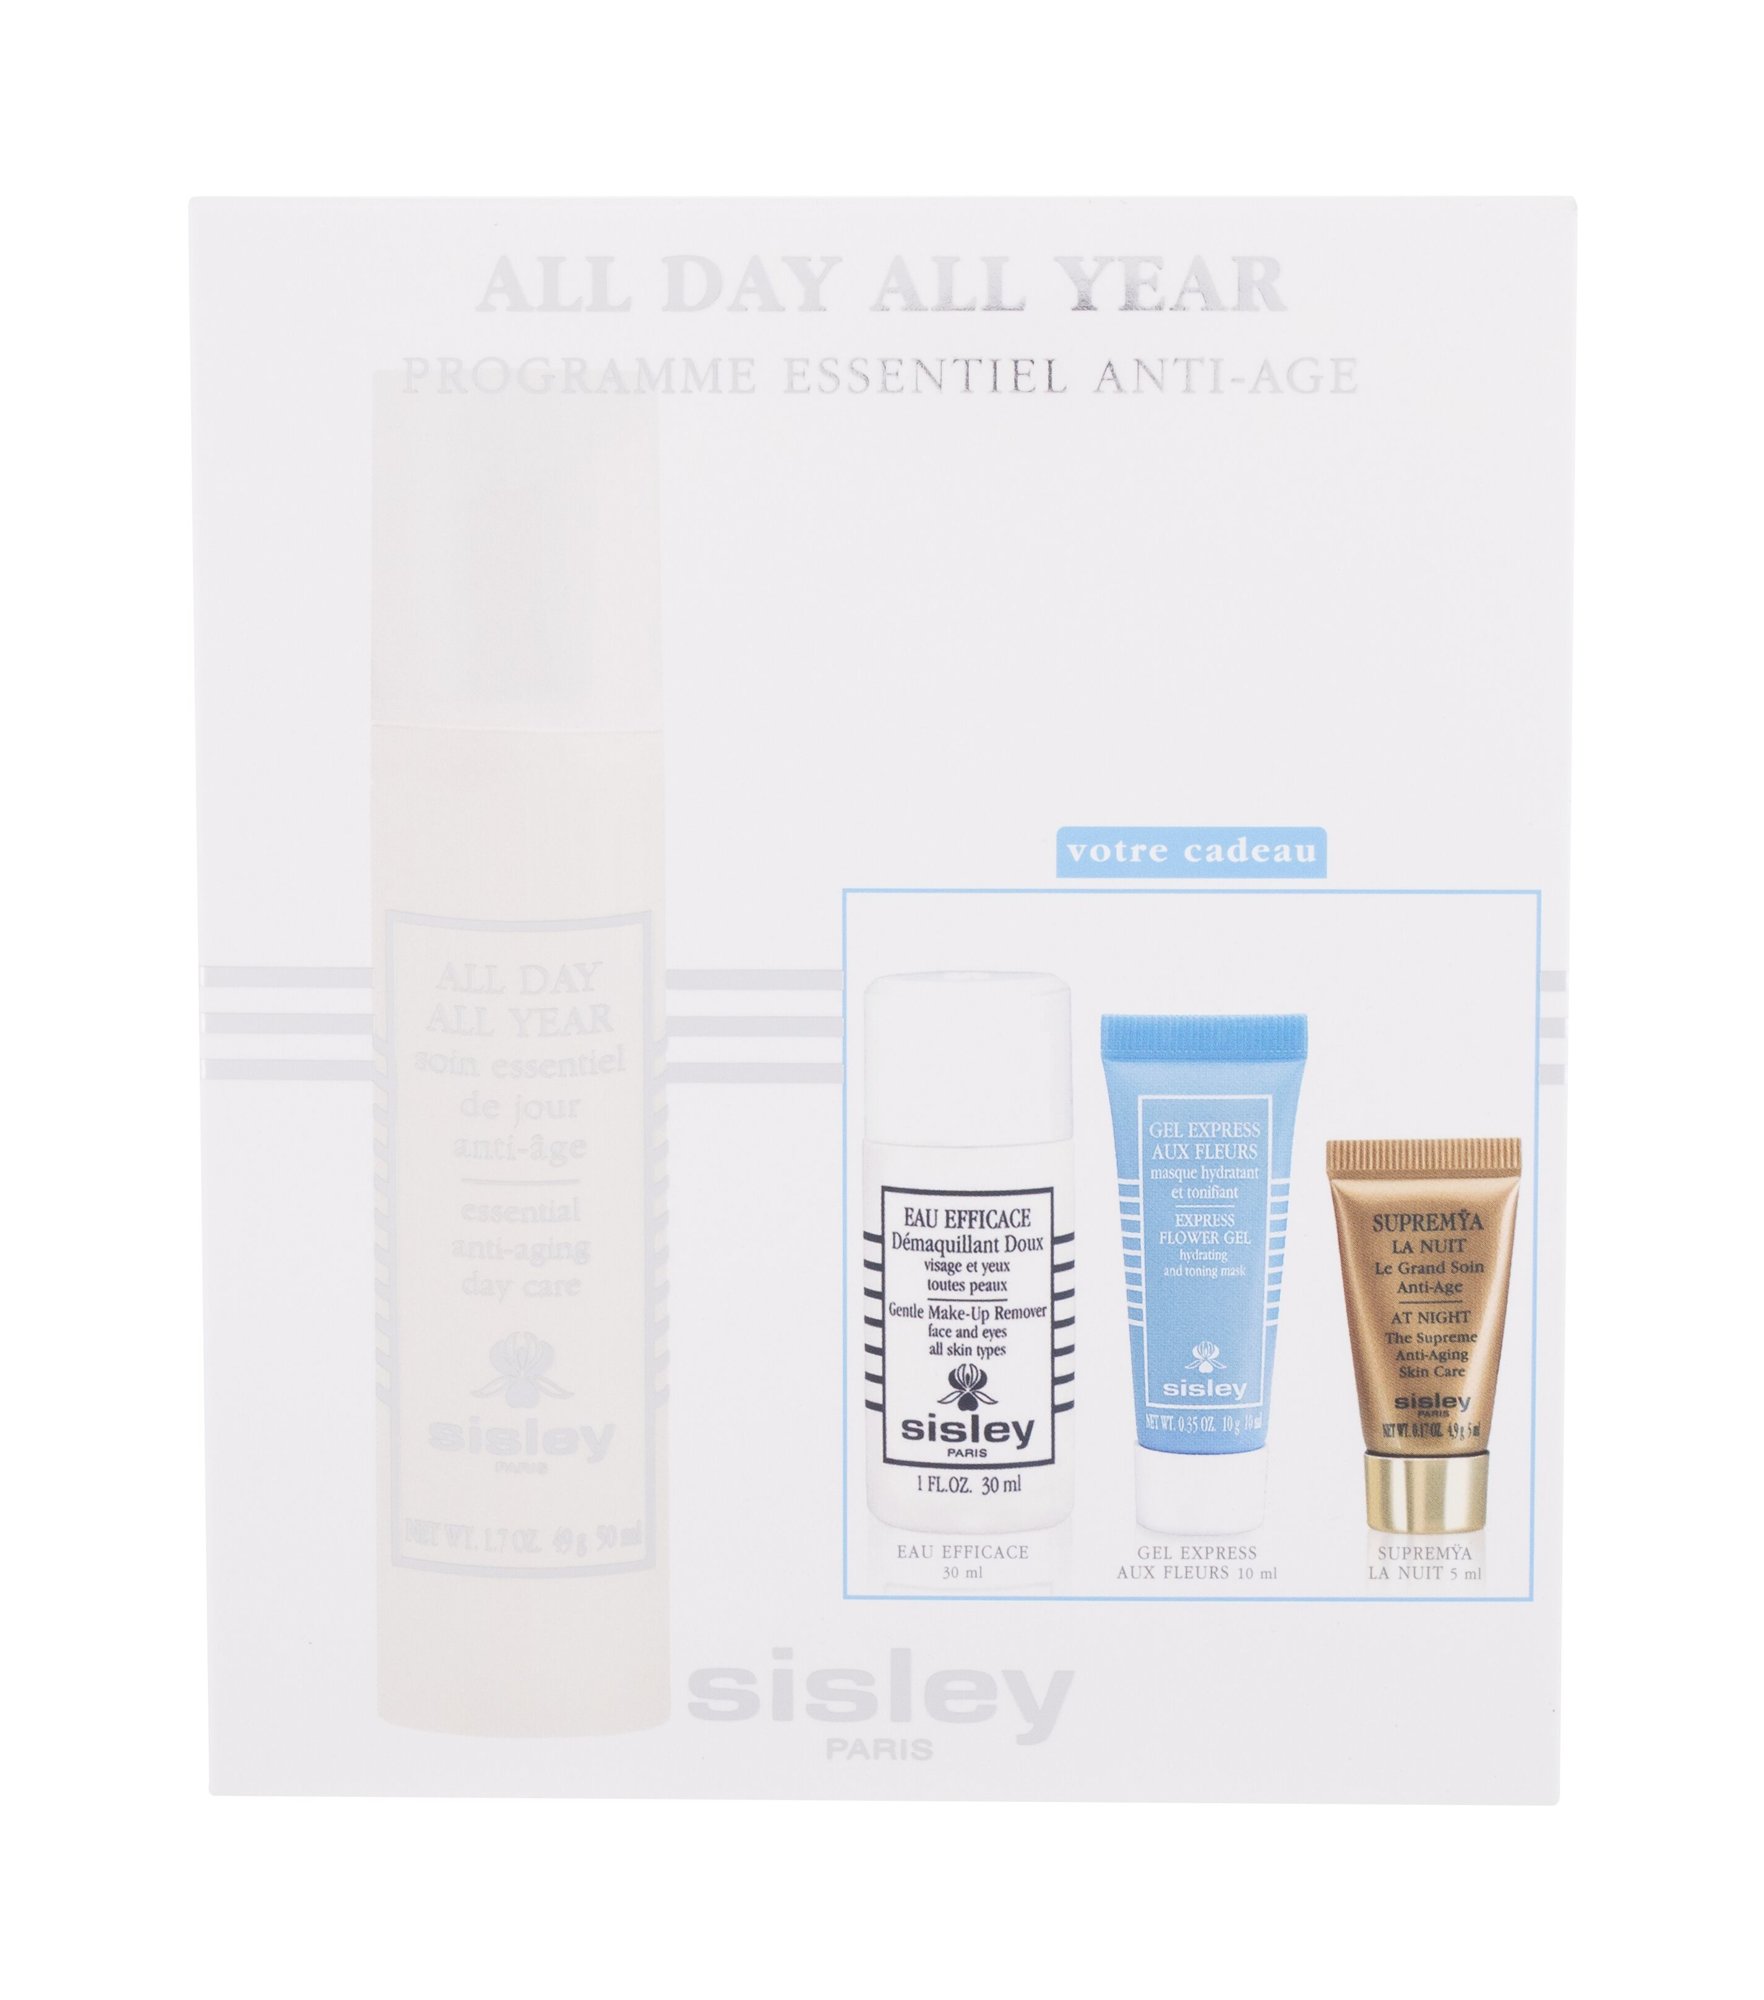 Sisley All Day All Year 50ml NIŠINIAI All Day All Year Essential Anti-Aging Day Care 50 ml + Express Flower Gel Hydrating and Toning Mask 10 ml + Supremya At Night Anti-Aging Skin Care 5 ml + Eau Efficace Gentle Make-Up Remover 30 ml dieninis kremas Rinkinys